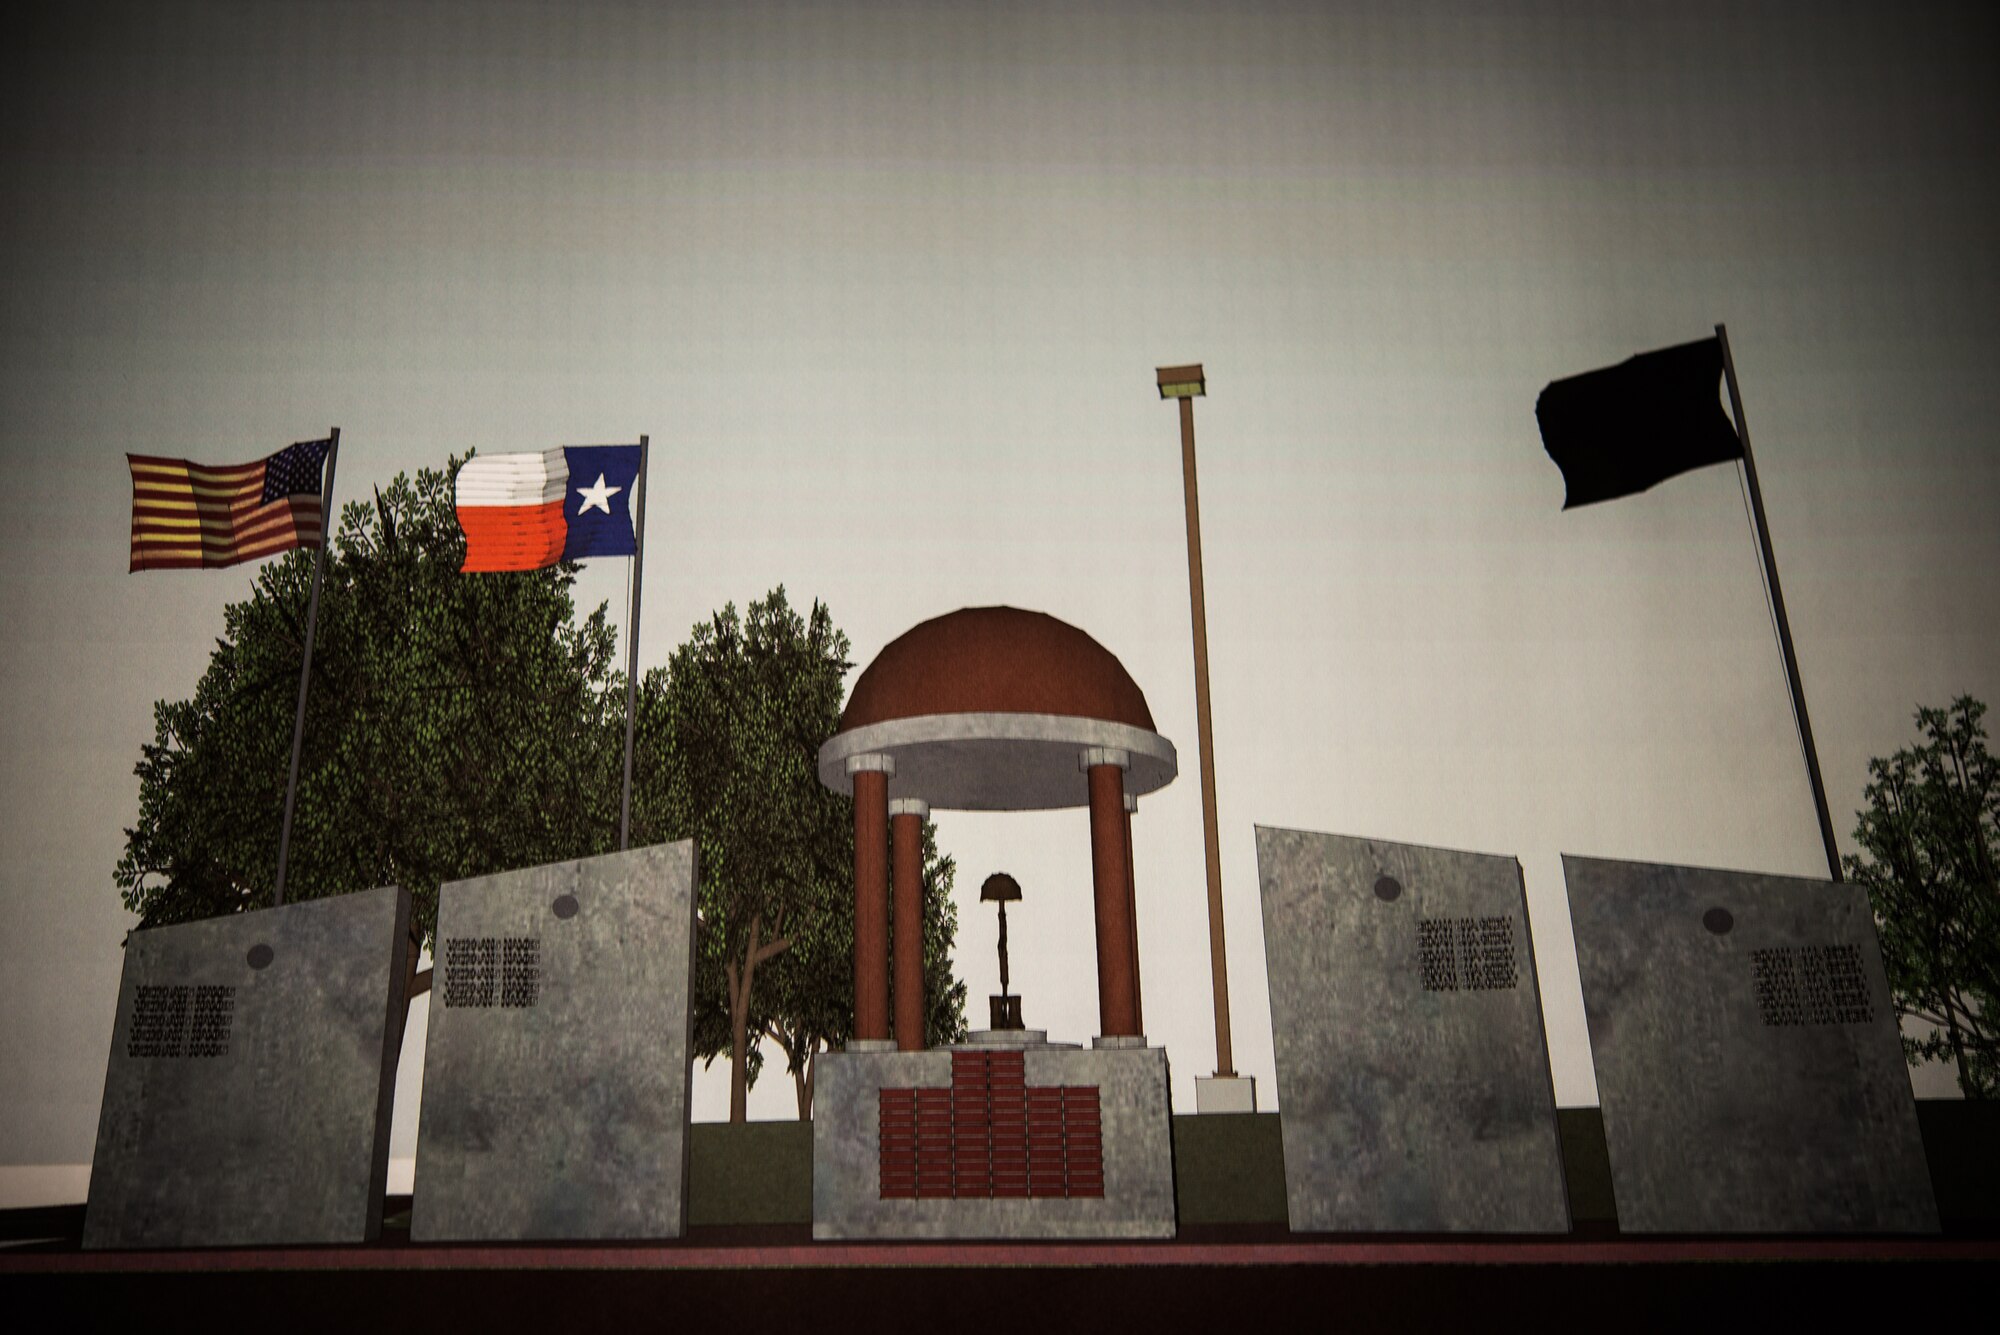 The photo is of the War Heroes Memorial illustration that was created in a program used by professional architects to manipulate various architectural symbols. The memorial is meant to commemorate native San Antonio veterans, from across the military services, who have lost their lives serving their country. (U.S. Air Force photo illustration by 1st Lt. Jose R. Davis)